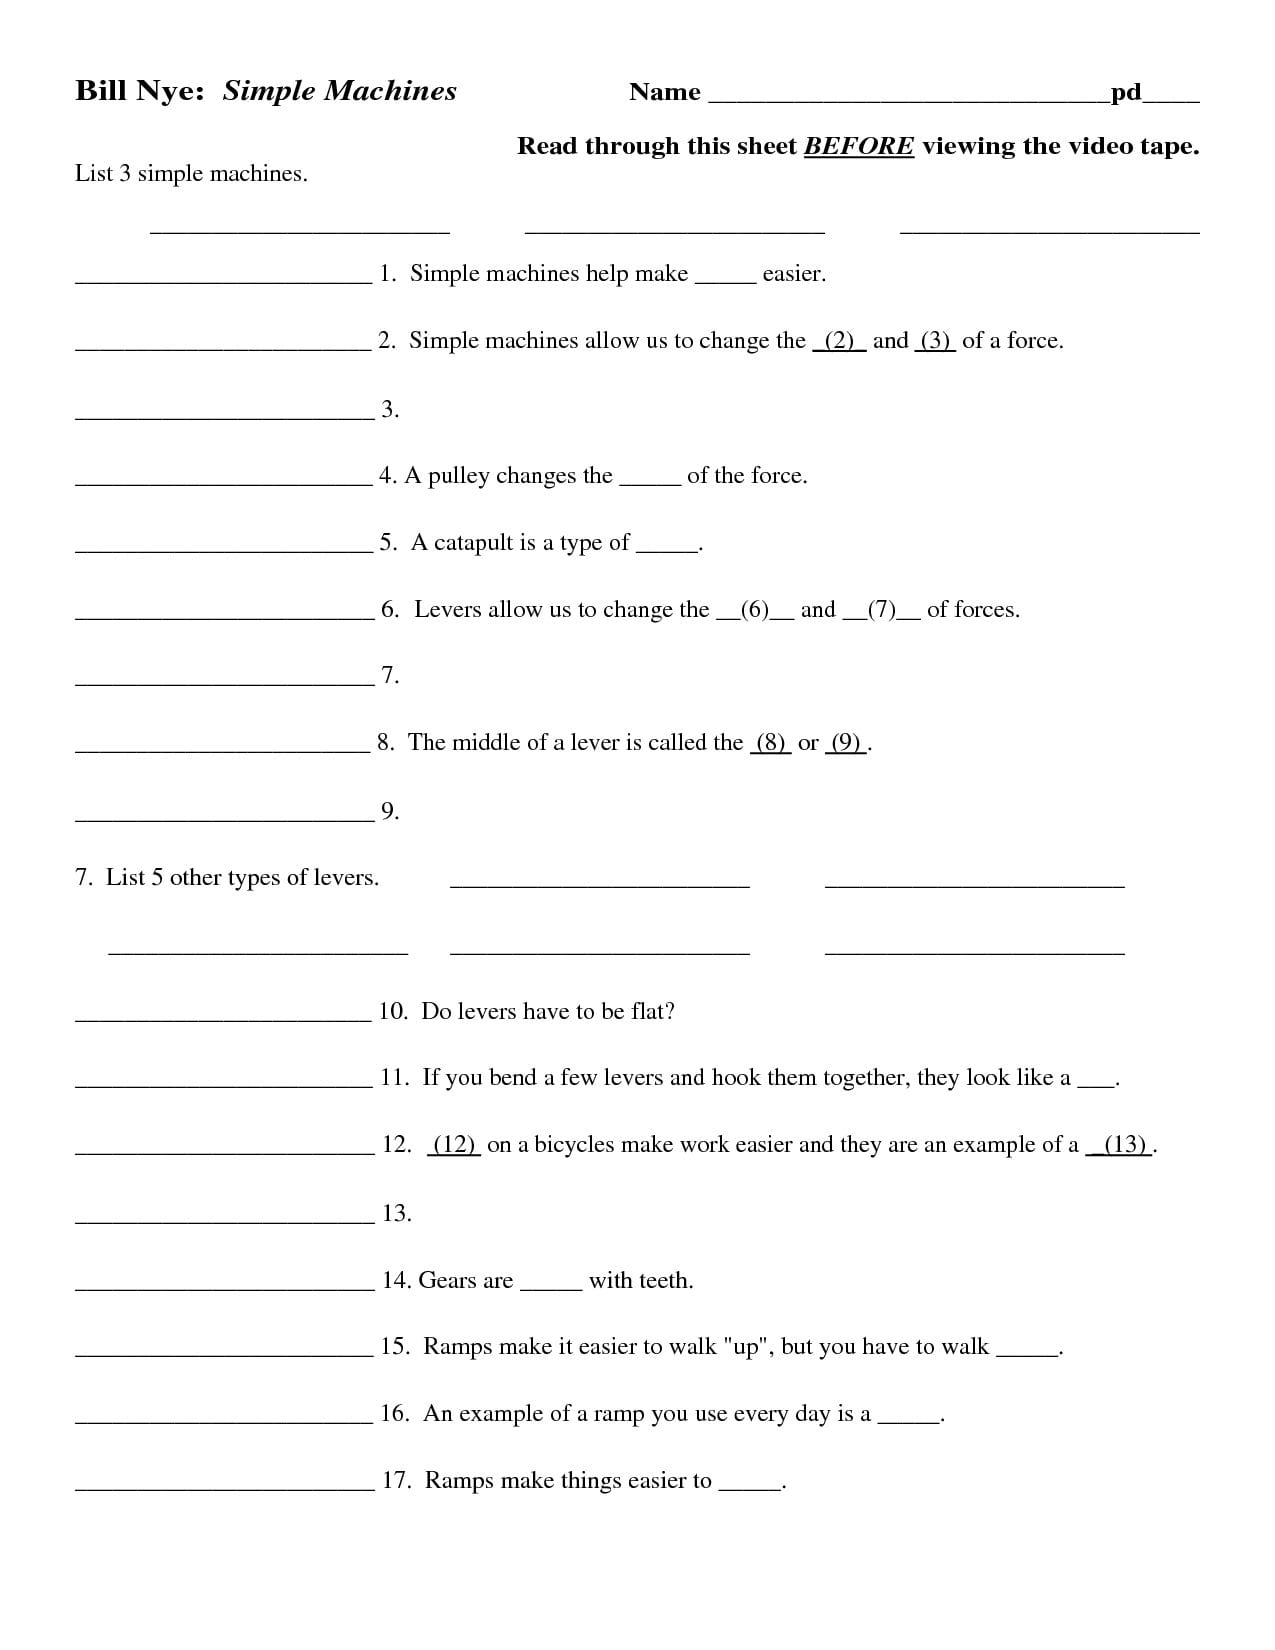 Bill Nye Simple Machines  Houston Laser Hair Removal Along With Bill Nye Simple Machines Worksheet Answers